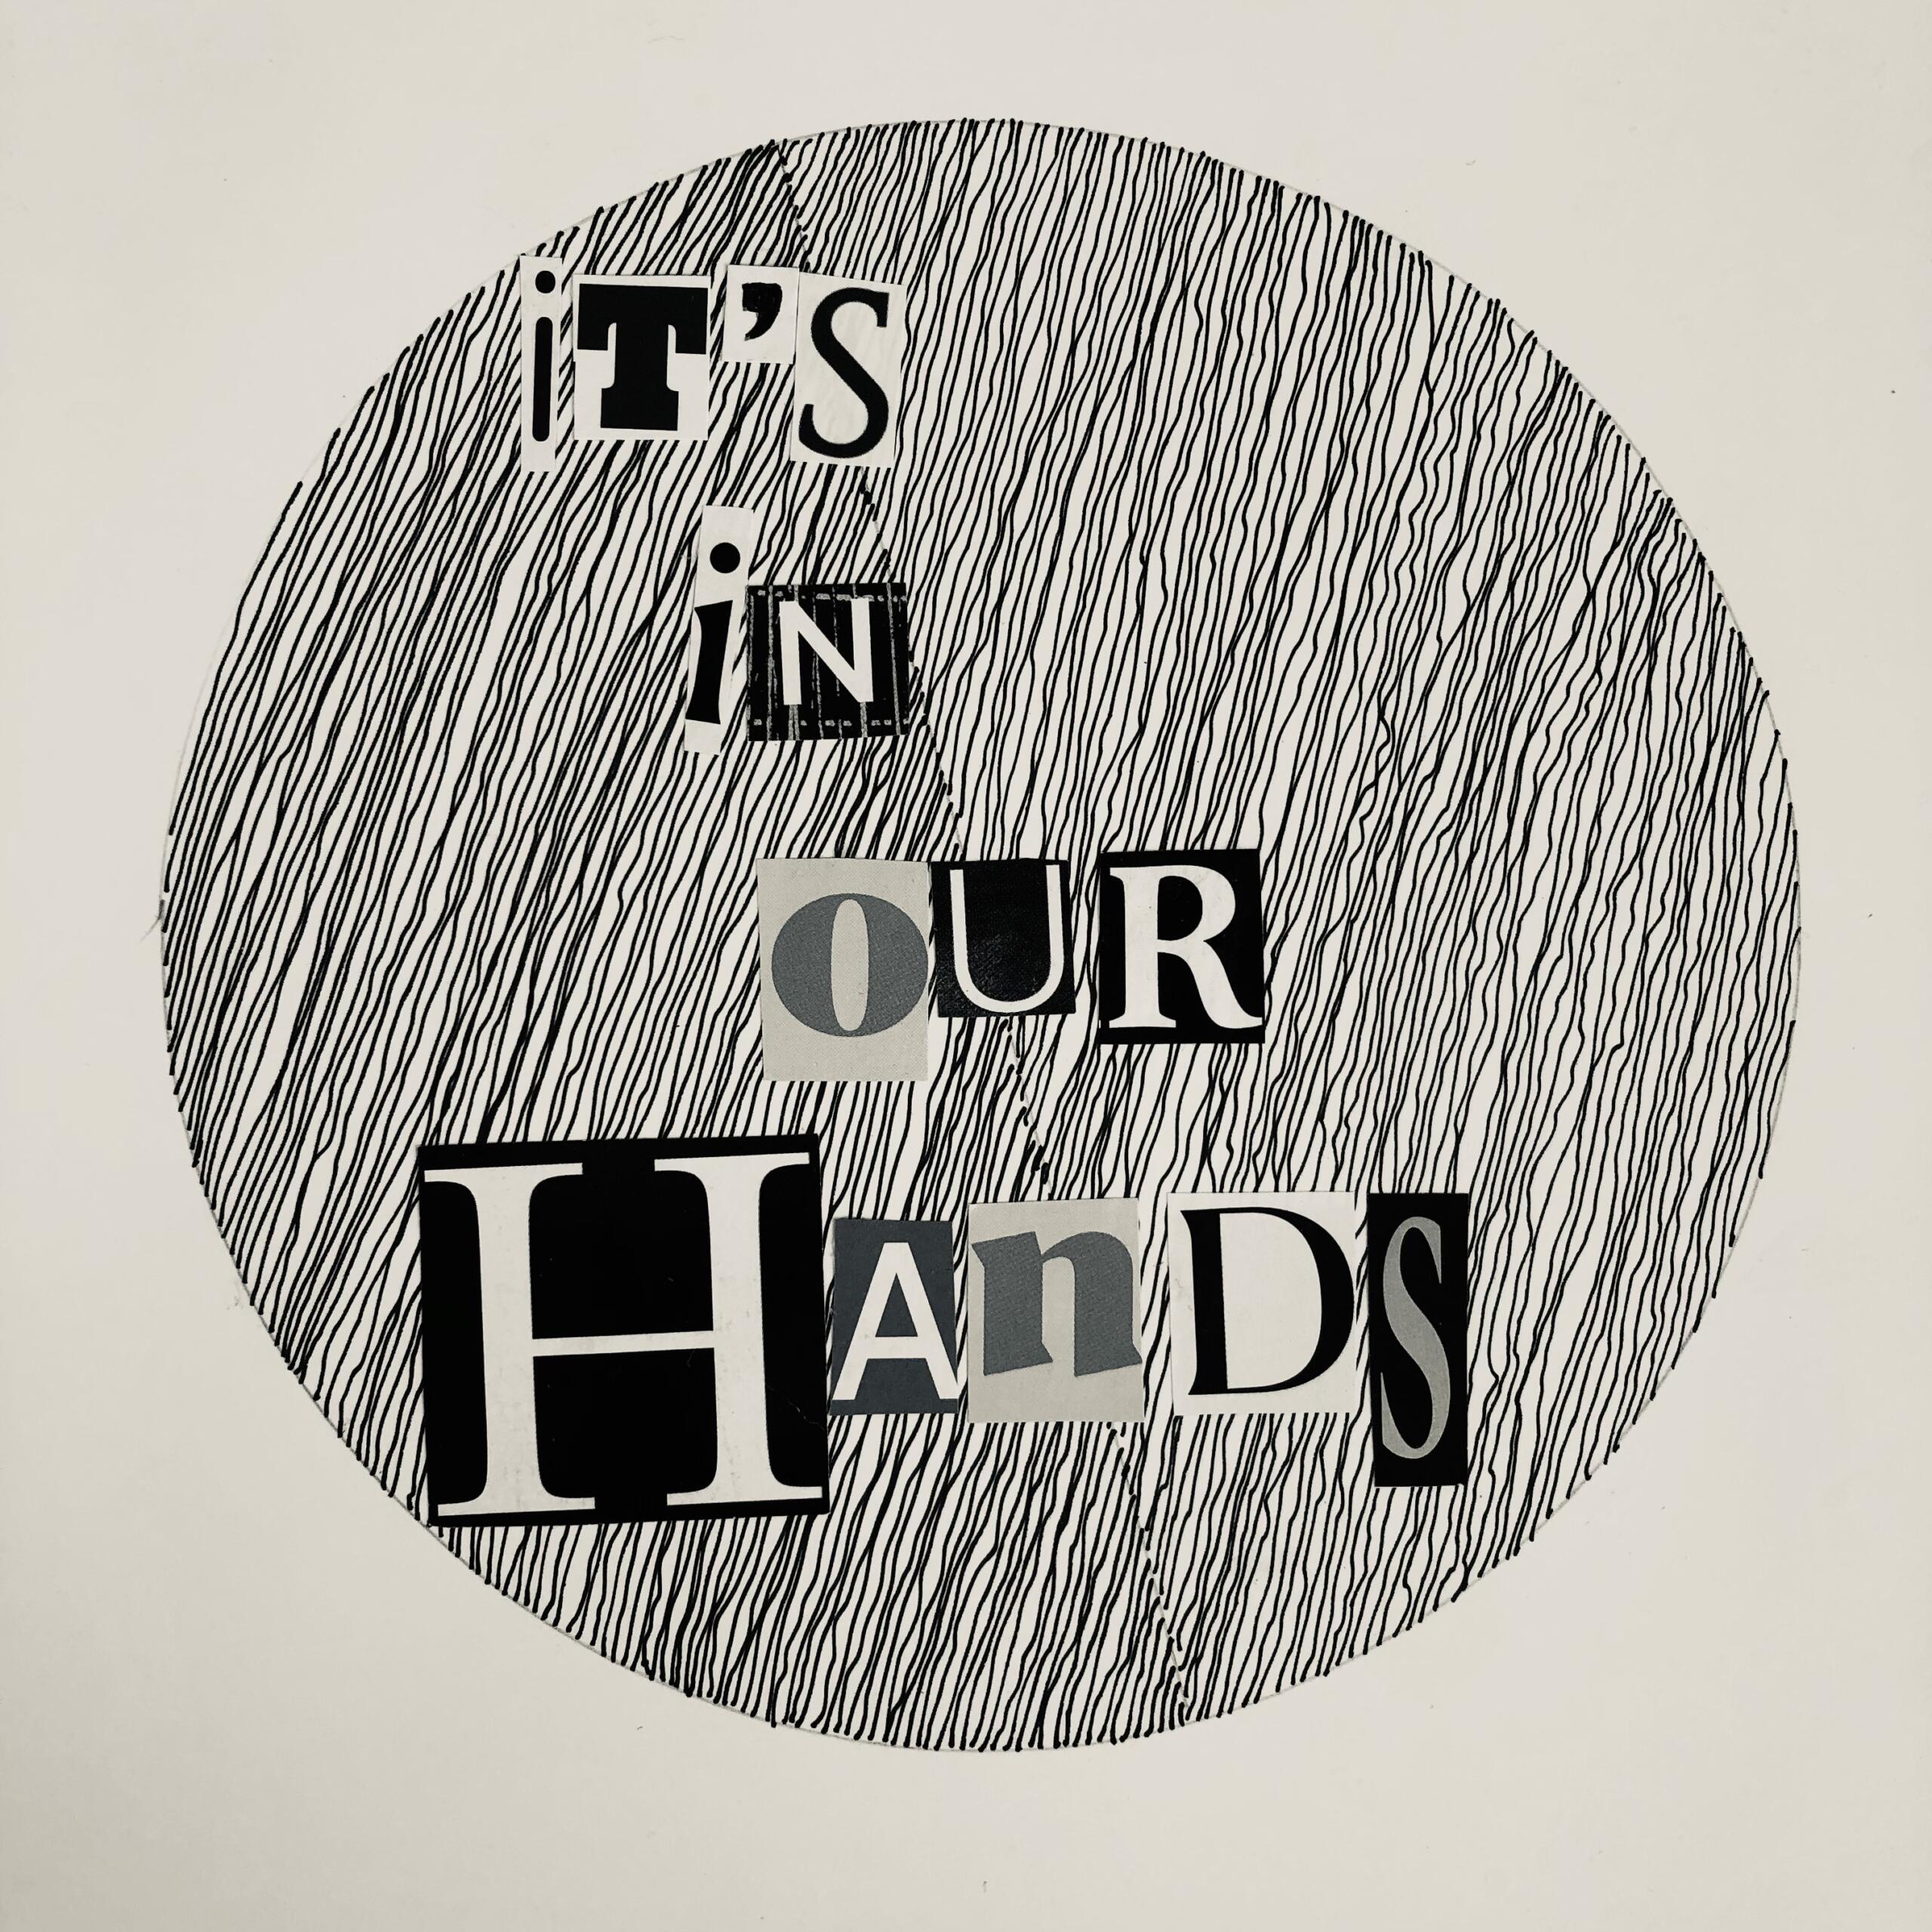 An abstract drawing of circles and lines, with letters cut in various styles collaged over that reads "its in our hands"